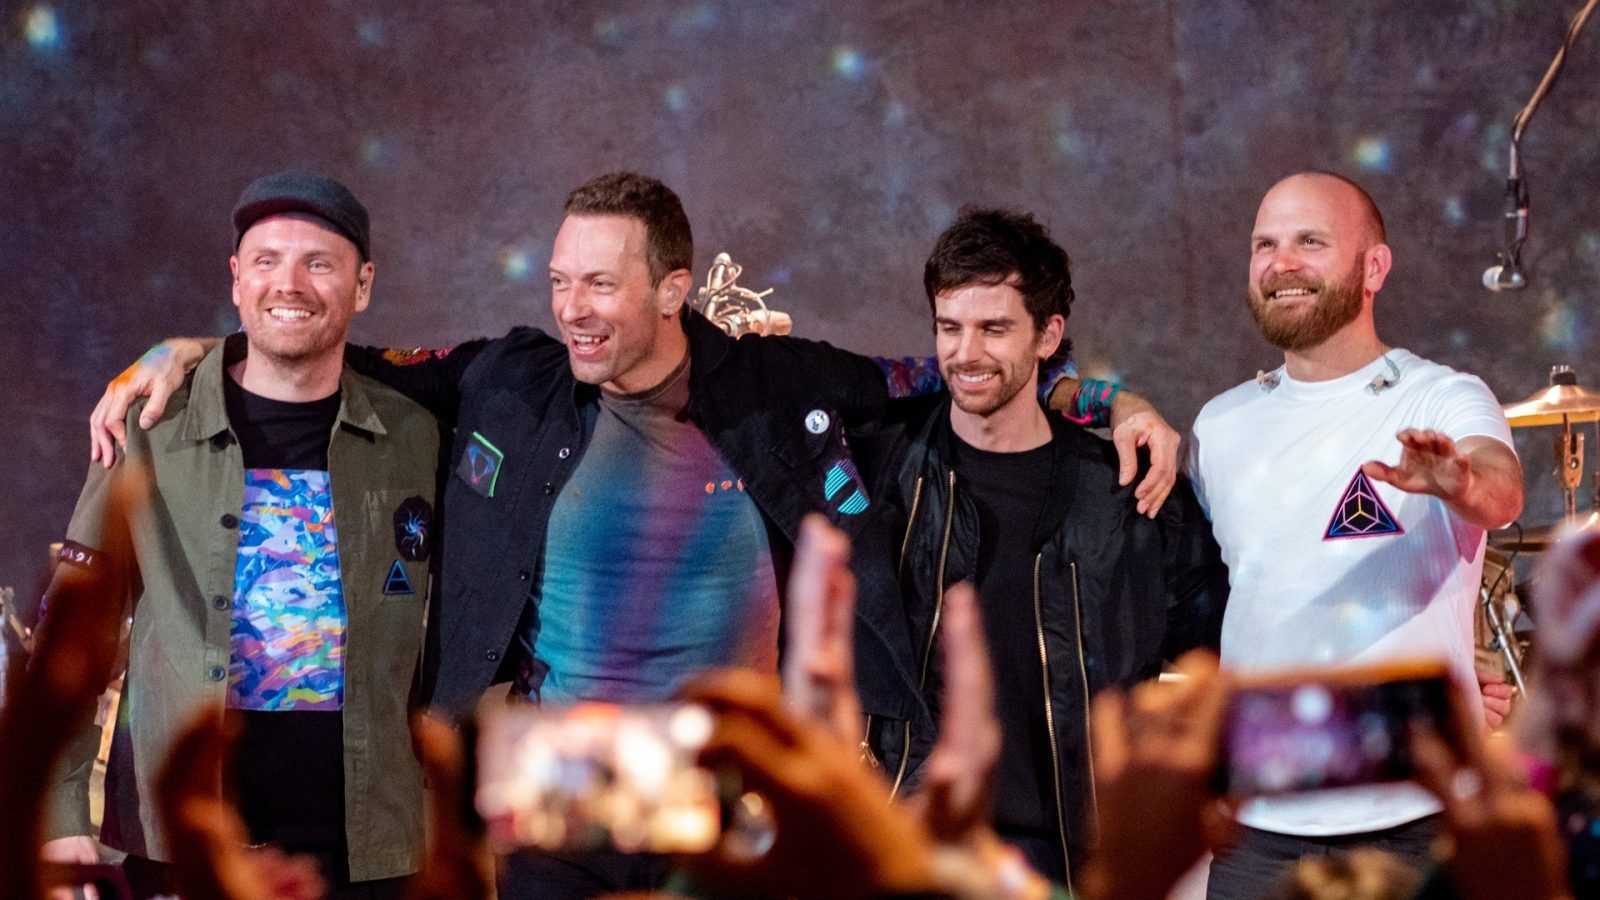 What Is Coldplay Singer Chris Martin's Net Worth Compared to His